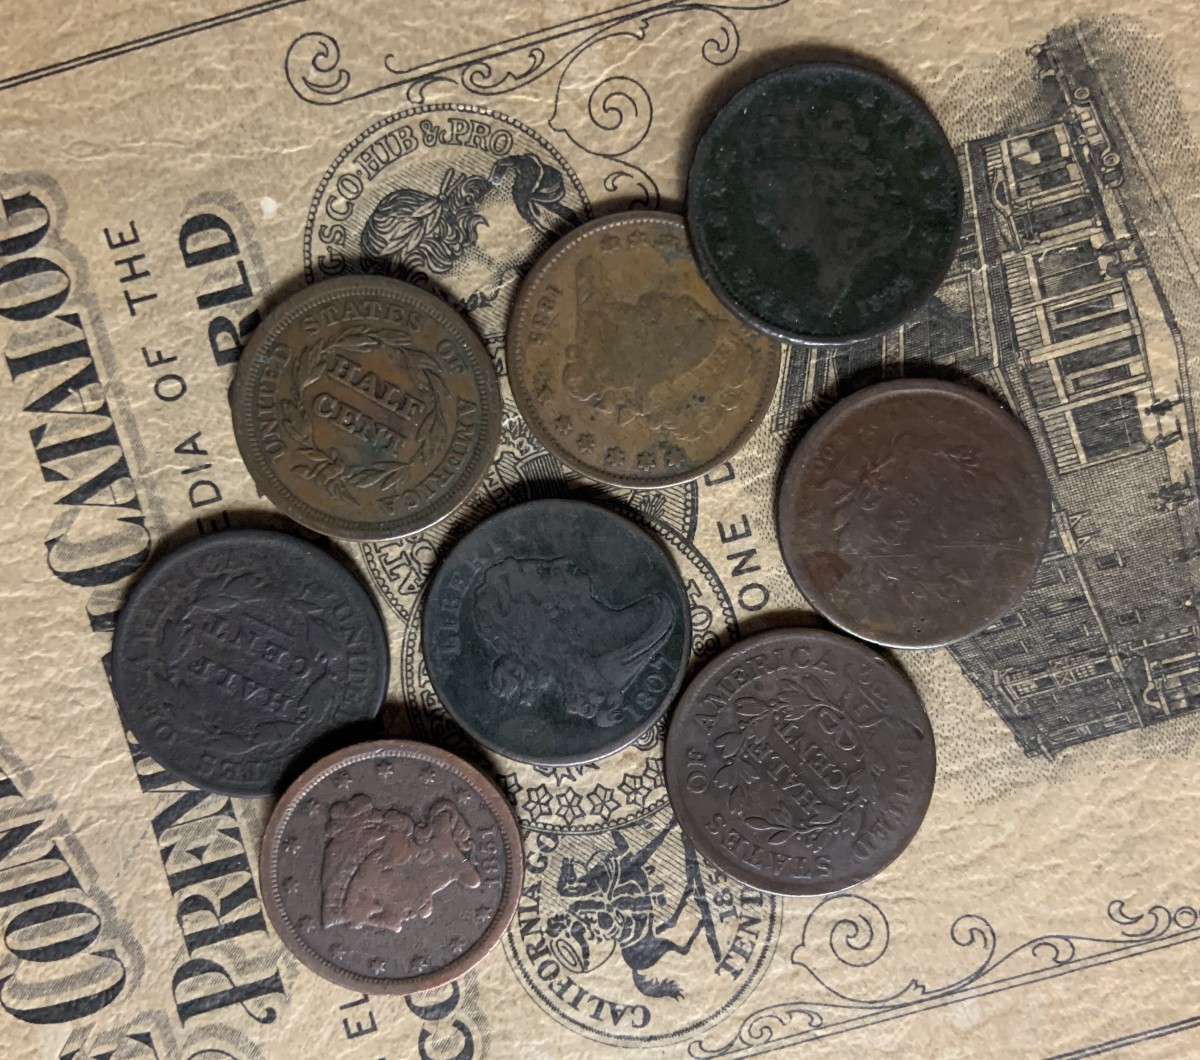 Collecting the U.S. Classic Head Half Cent Coin (1809 to 1836)